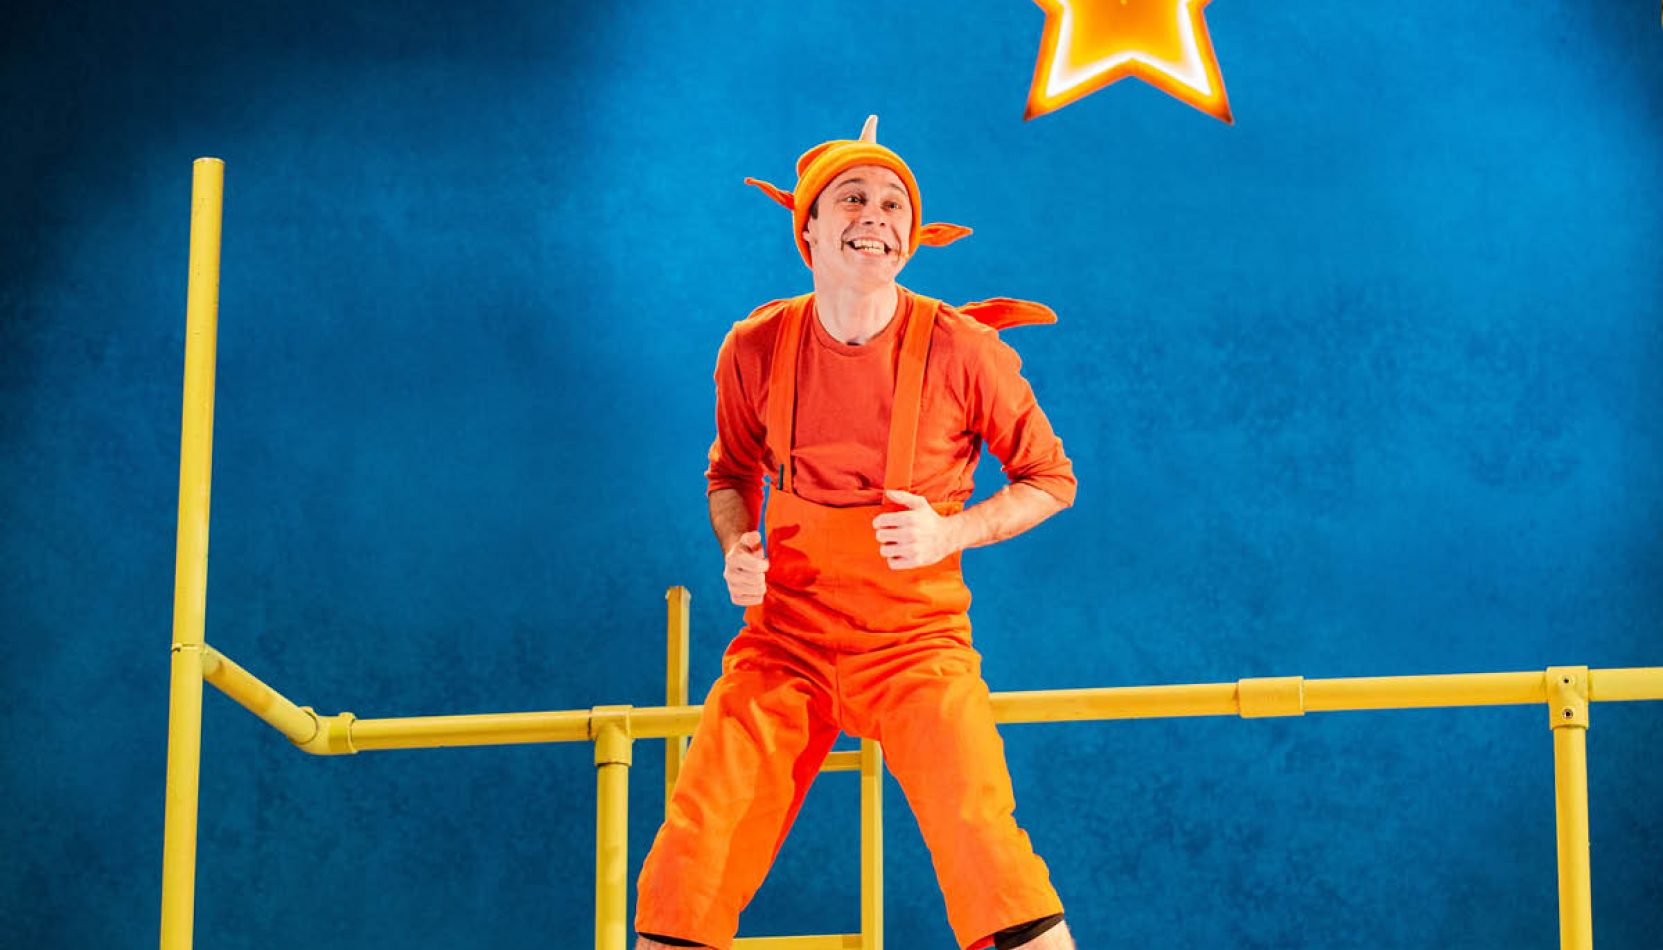 zog, rose theatre, kingston, guide to, guide to whats on, guide to whats on this summer, yes fam, fun for the family, family days out, family fun, theatre, activities, days out, august 2021, summer holidays, things to do with the family this summer